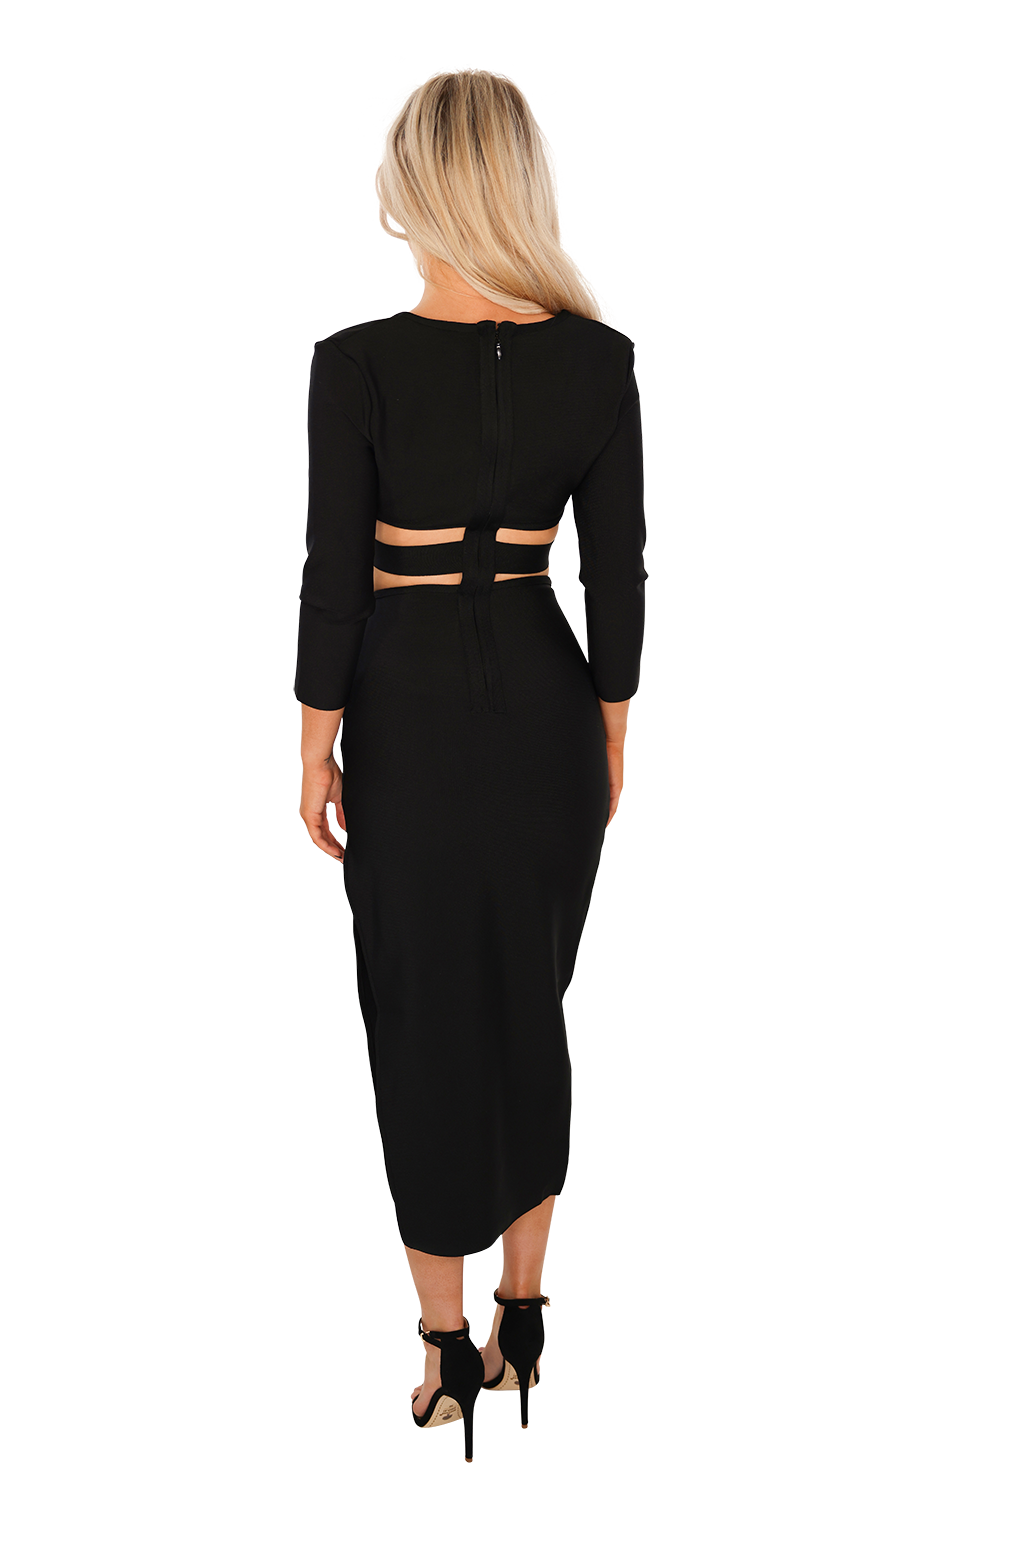 Sophisticated black cutout midi dress with bust detail